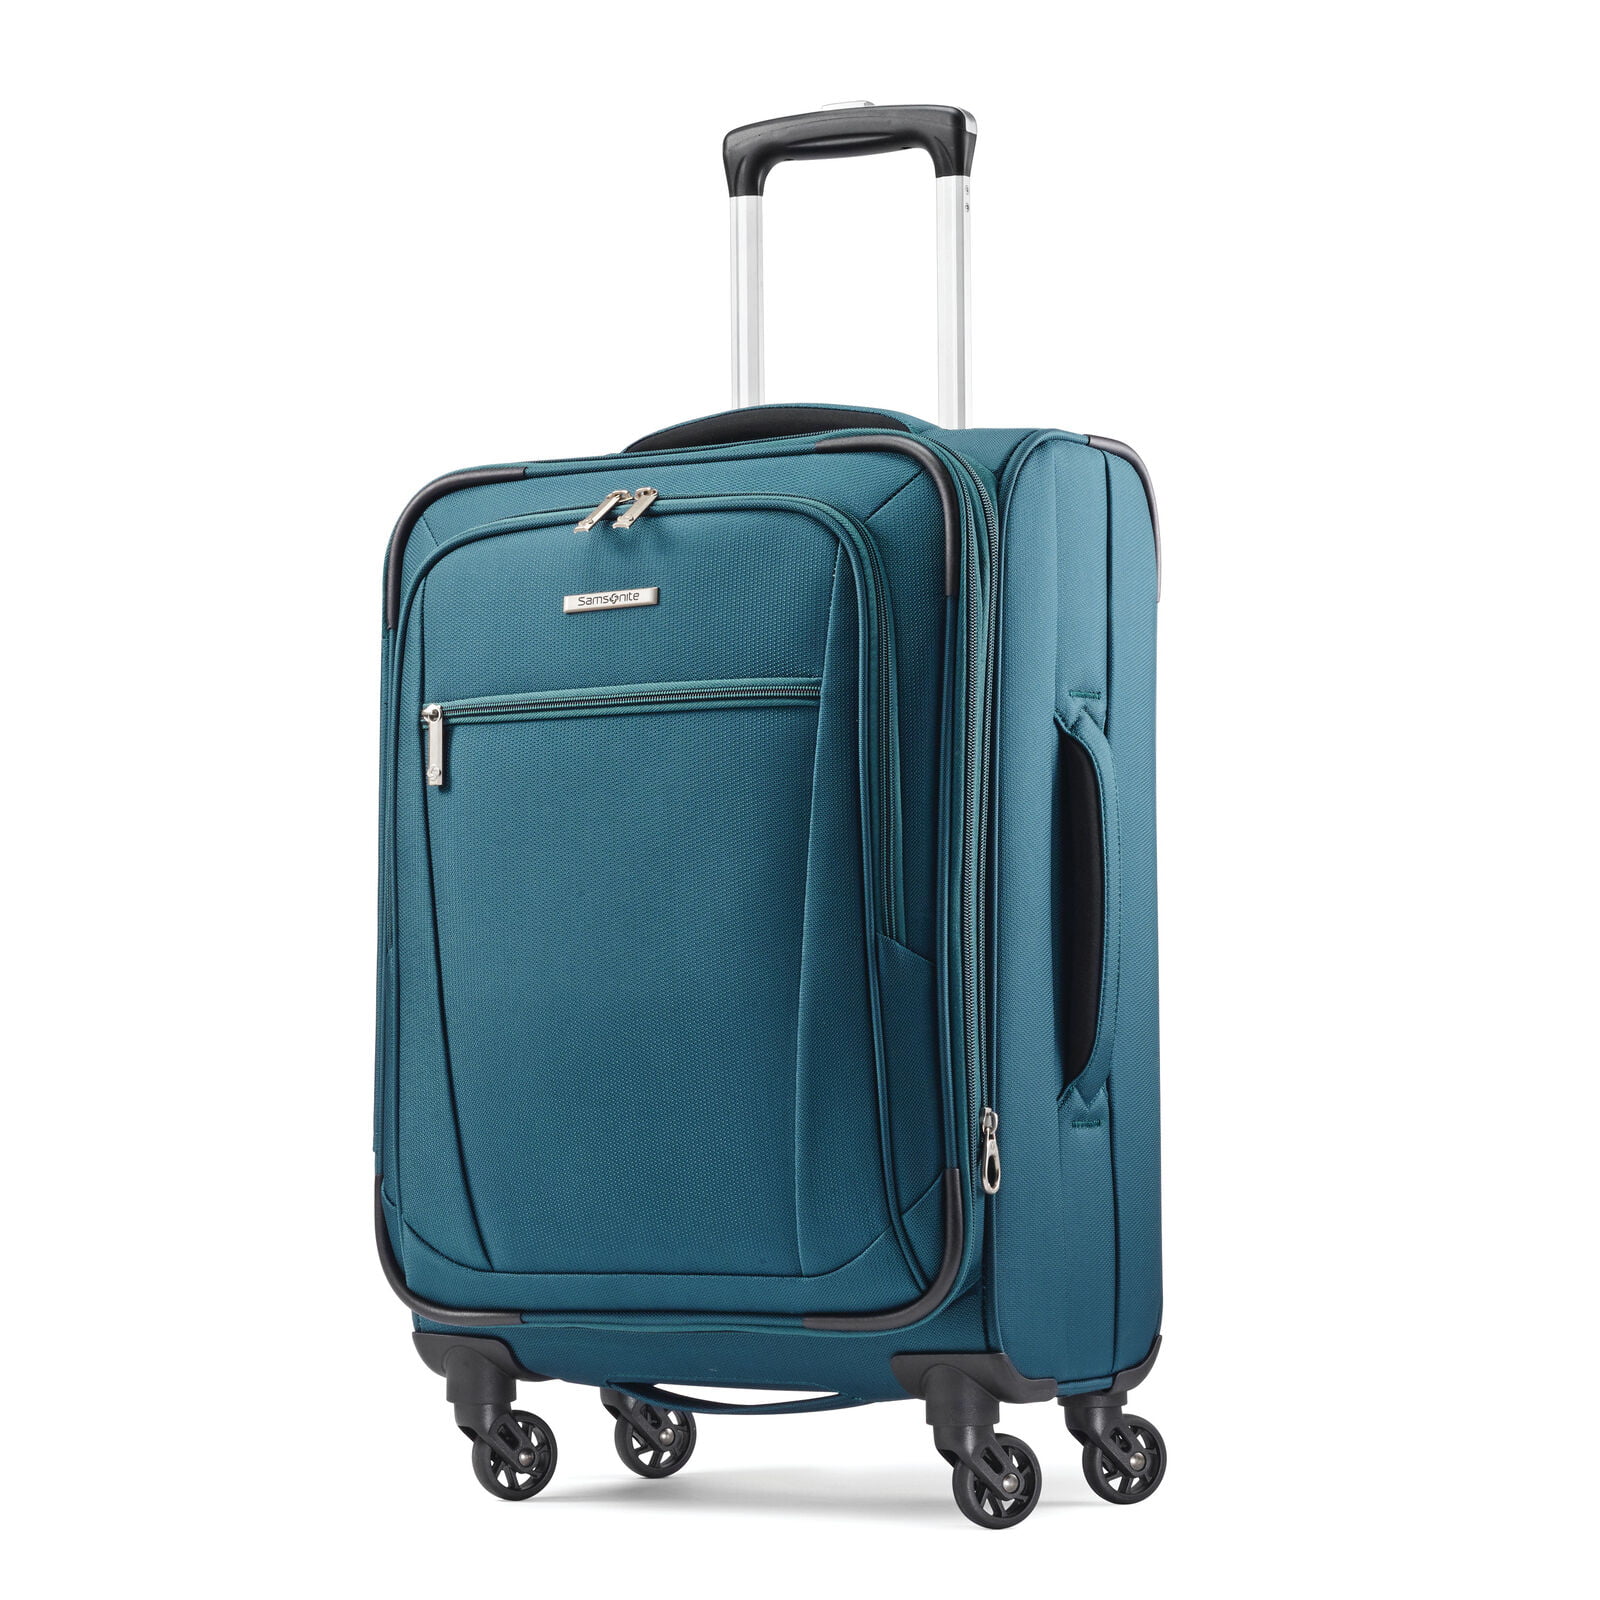 Samsonite Leverage LTE Expandable Softside Luggage with Spinner Wheels 